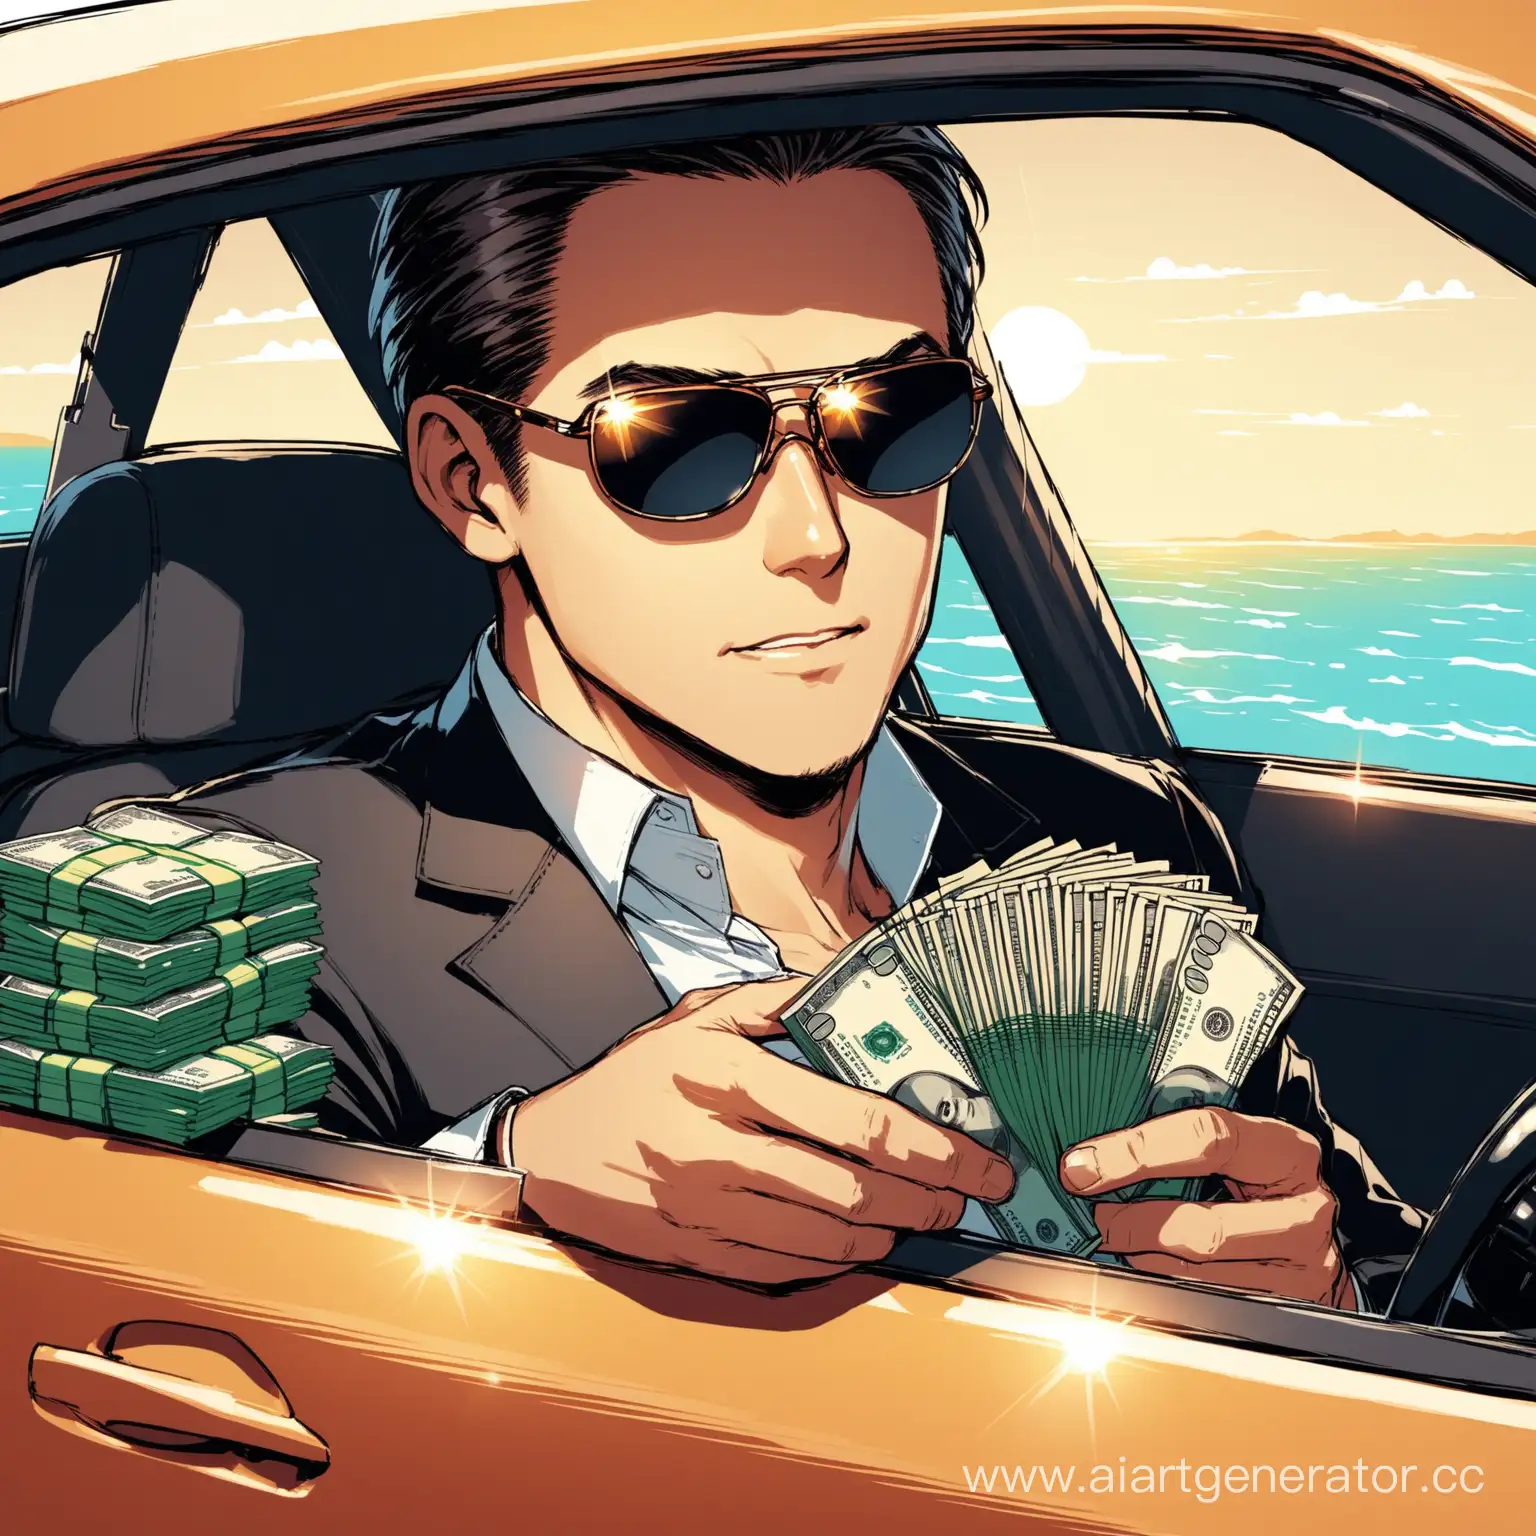 Man-in-Sunglasses-Enjoying-a-Leisurely-Drive-While-Counting-Cash